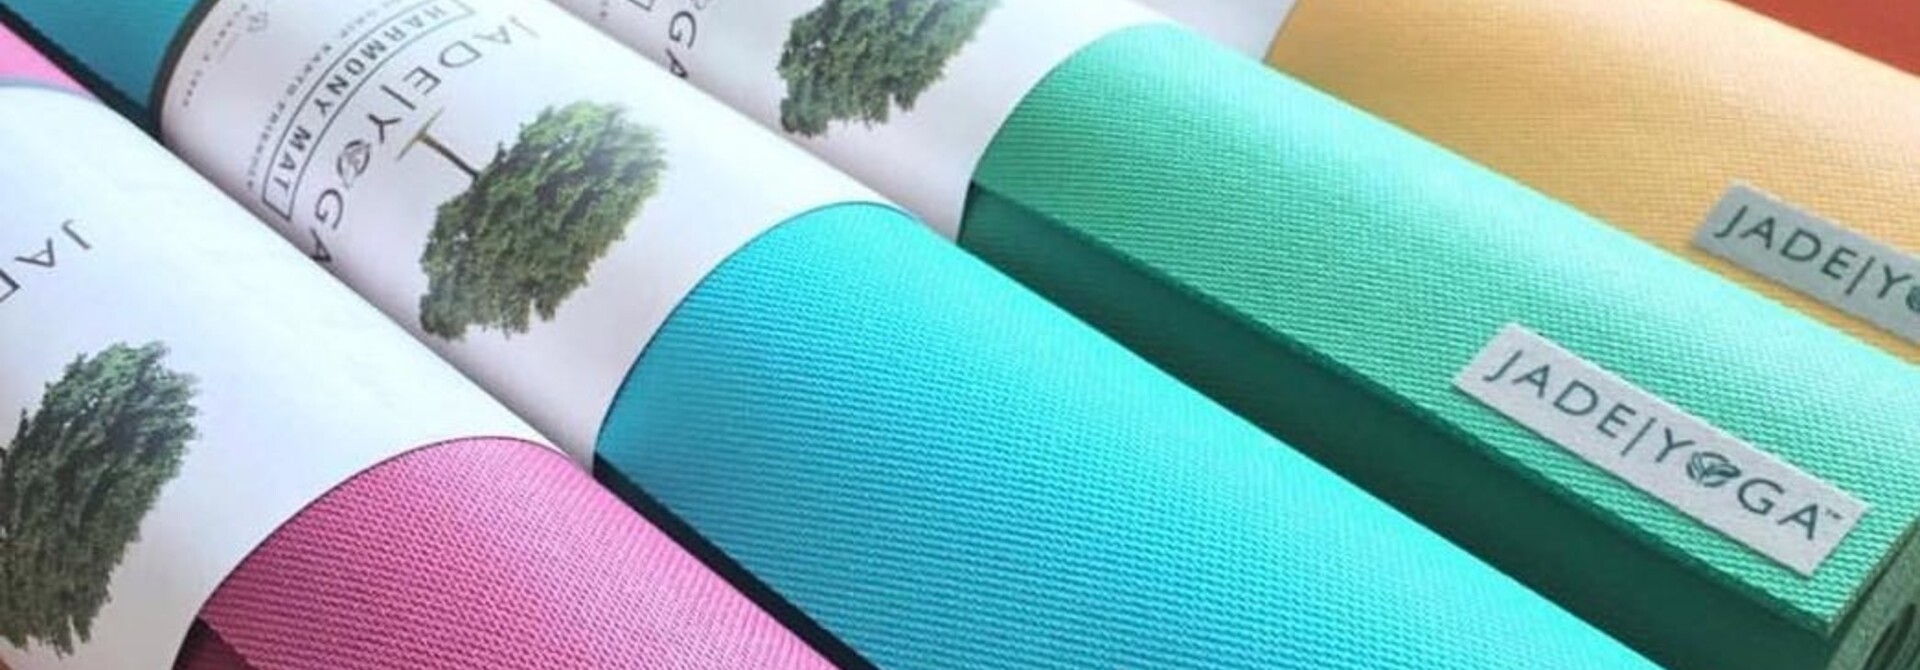 Yoga mats: How to choose one, what material is best and what suits  different styles?